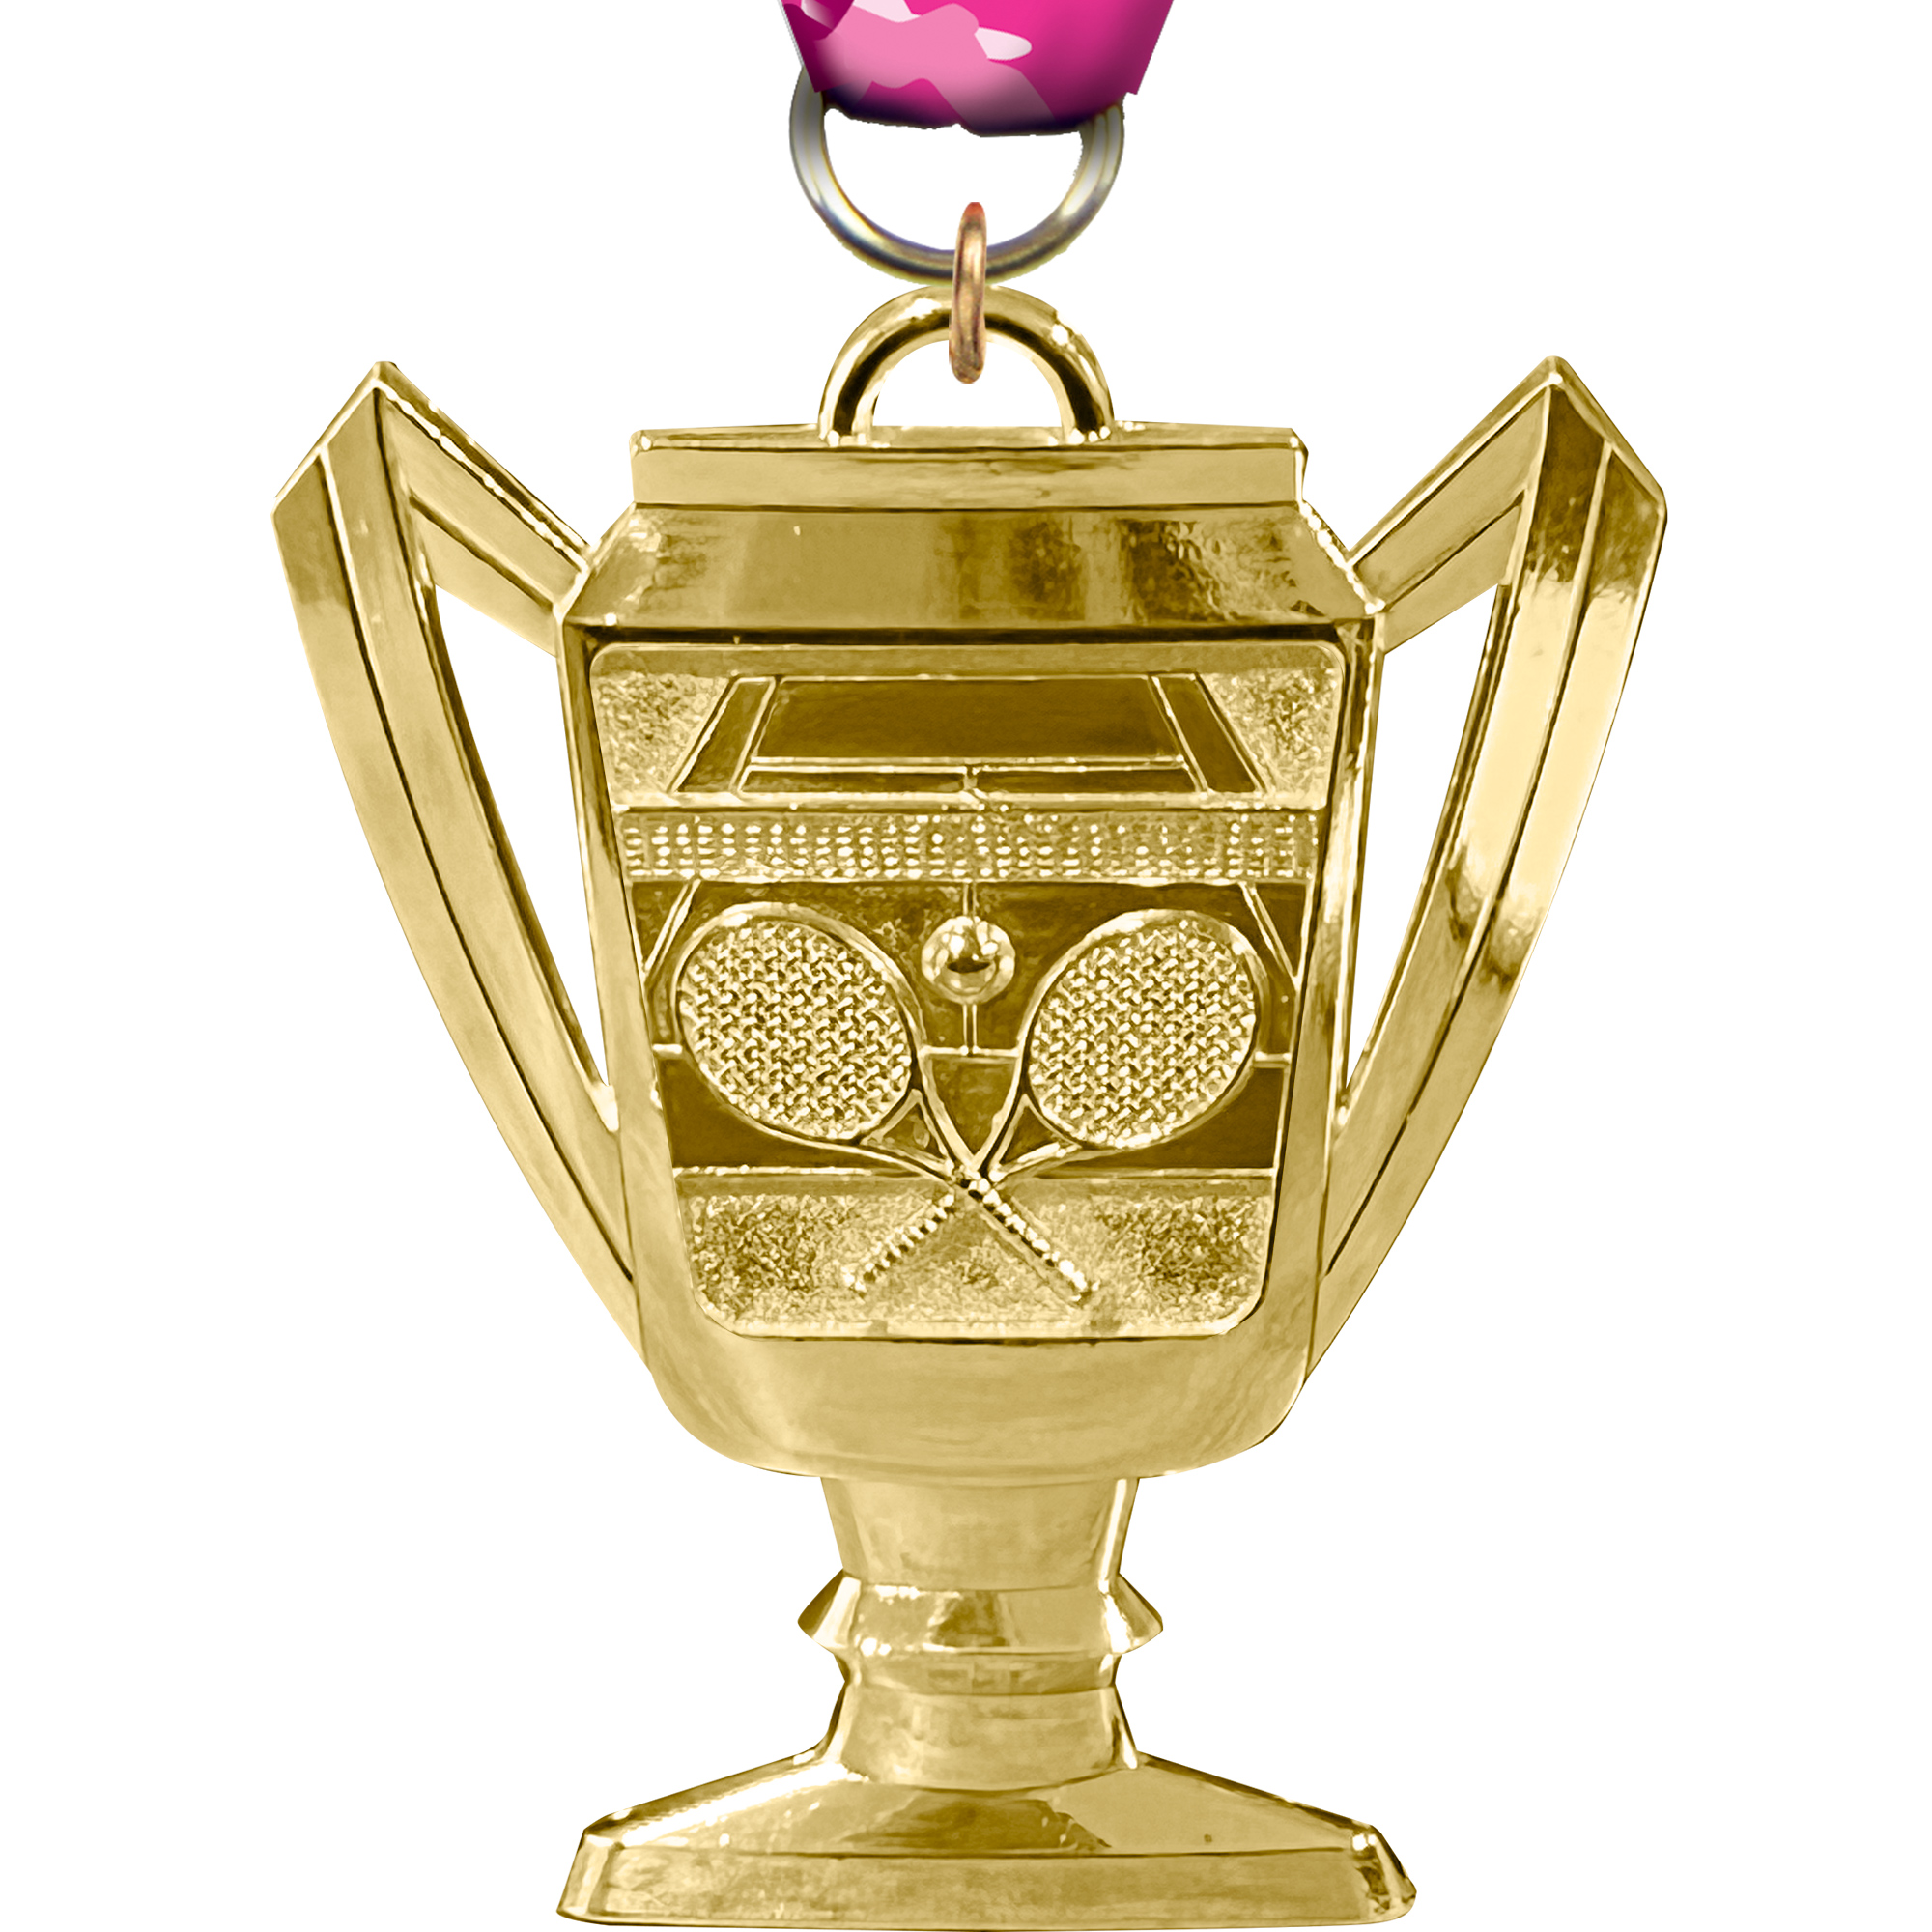 Tennis Bright Gold Trophy Cup Medal